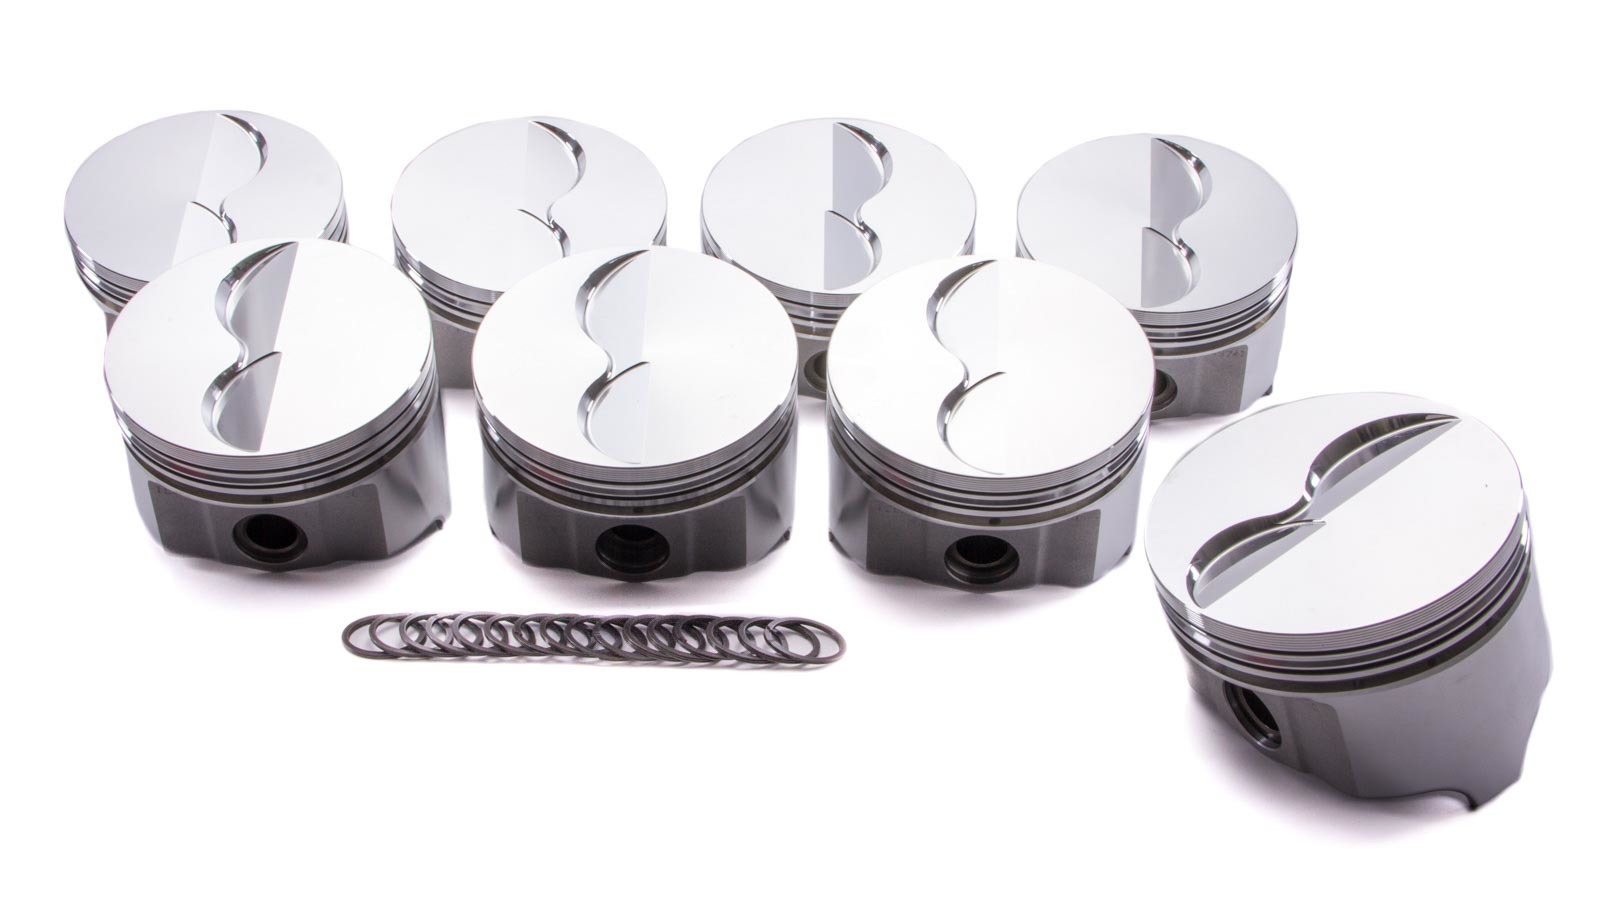 Icon Pistons IC822.030 Piston, Premium Forged, Forged, 4.350 in Bore, 1/16 x 1/16 x 3/16 in Ring Grooves, Minus 4.50 cc, Mopar RB-Series, Set of 8